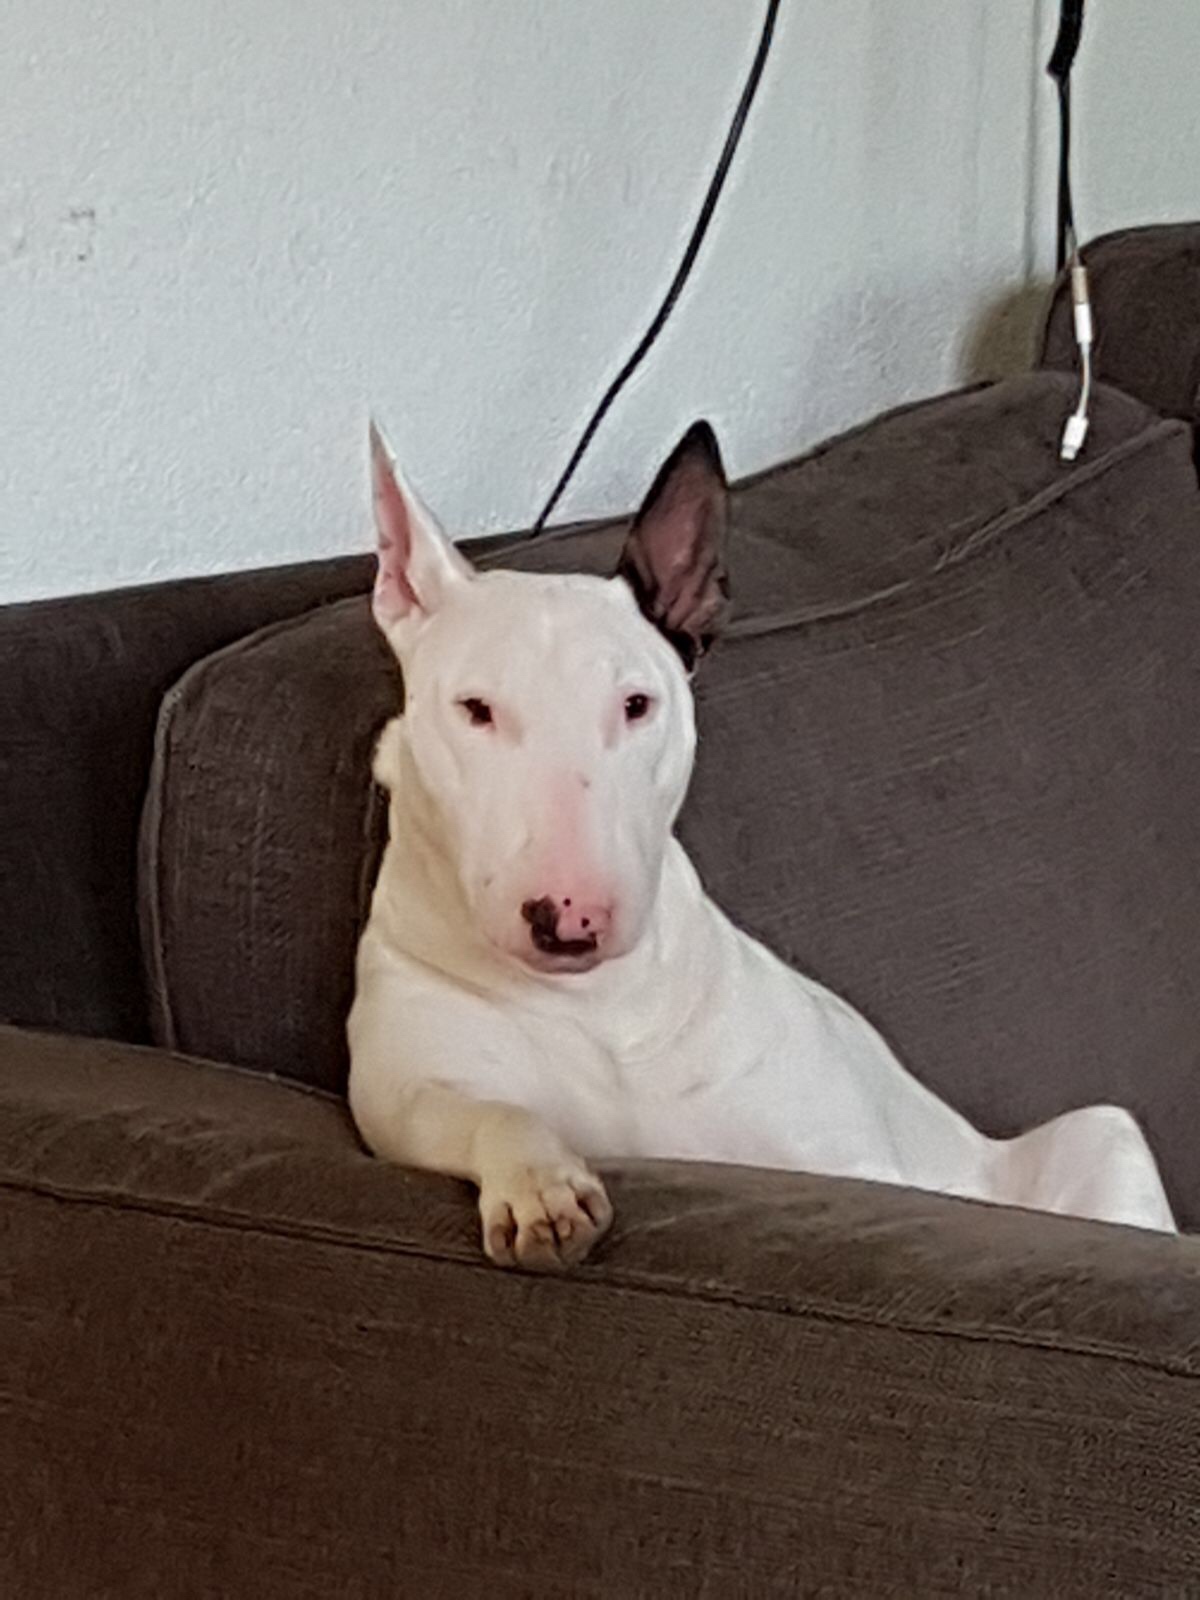 English Bull Terrier sitting on the couch